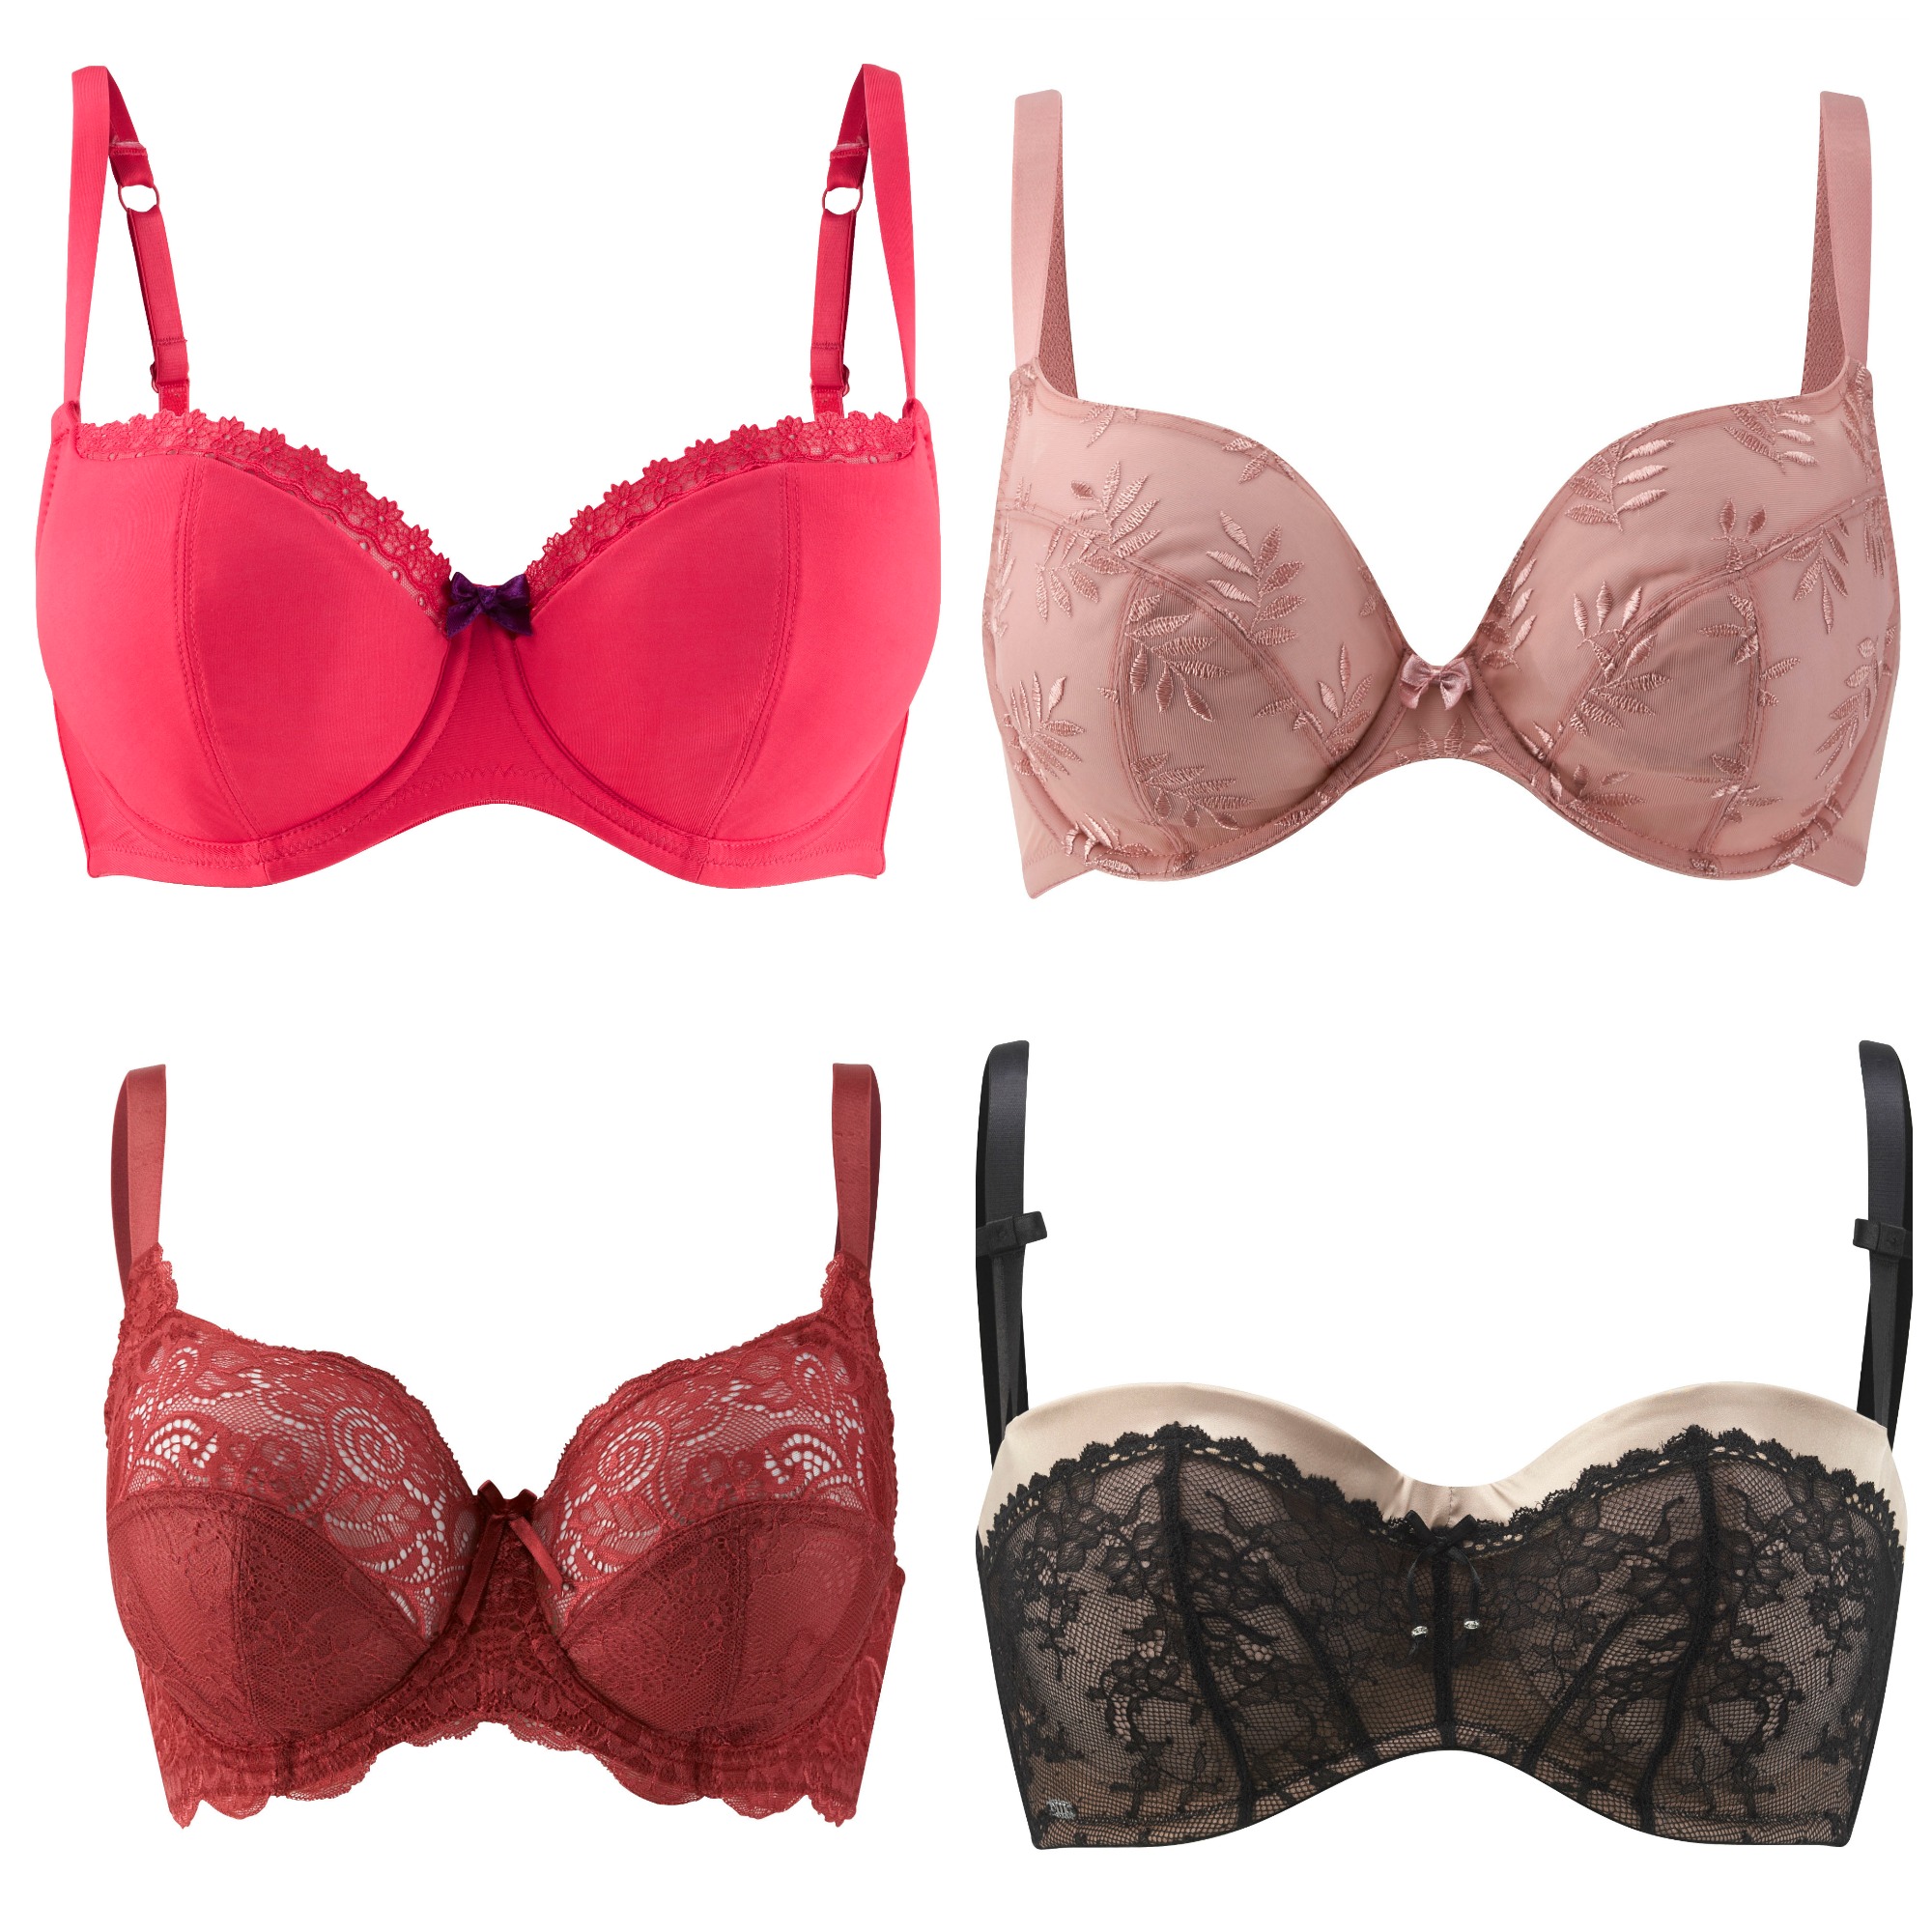 Why doesn't Victoria Secret carry bras larger than a cup size DDD? - Quora